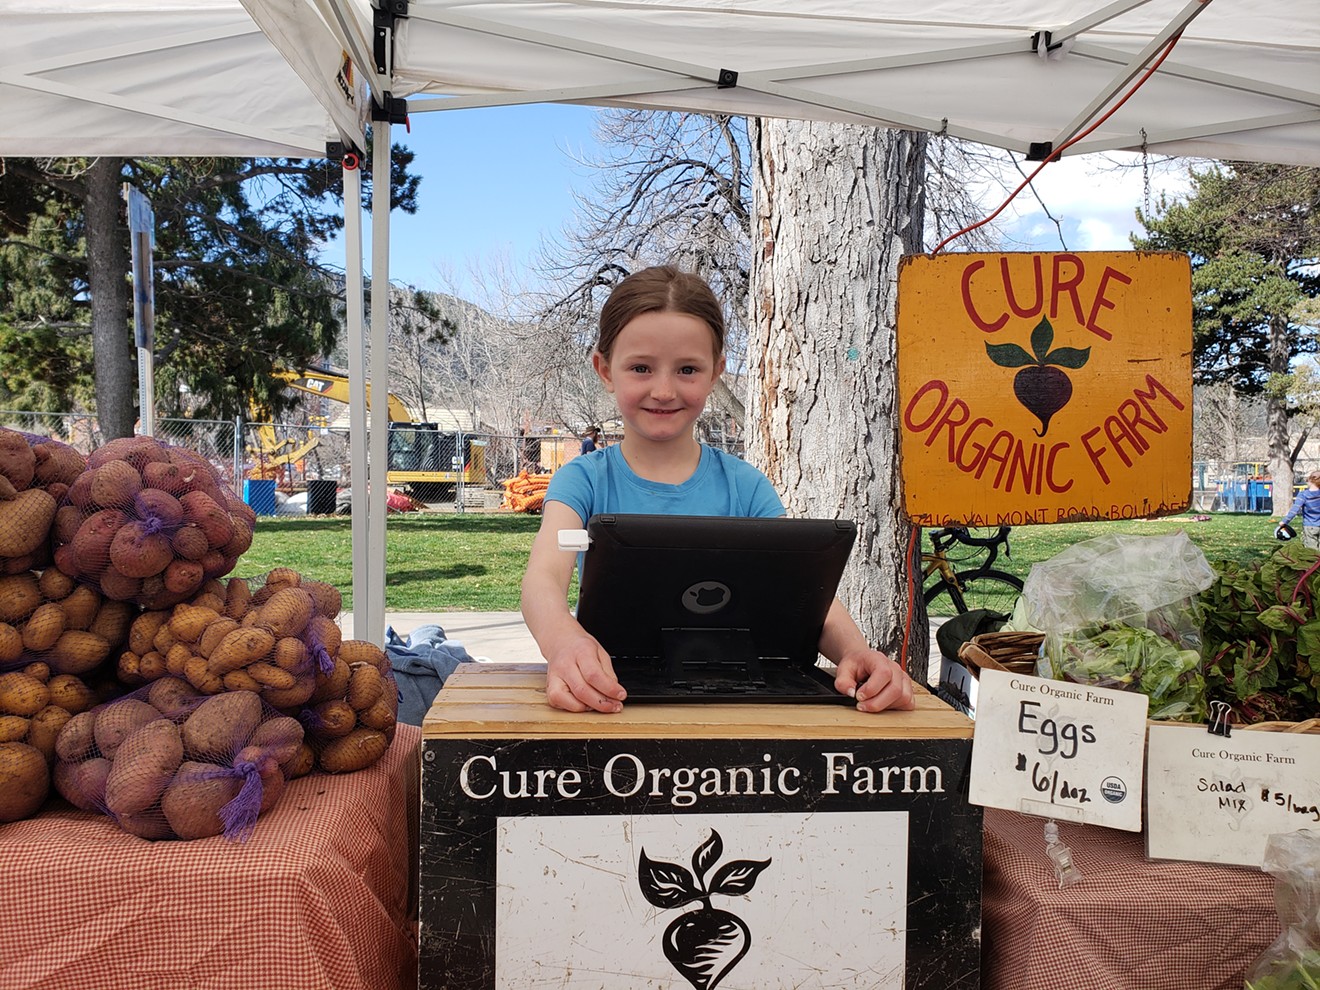 Six-year-old Lauren works her family's stall at the Boulder Farmers' Market.